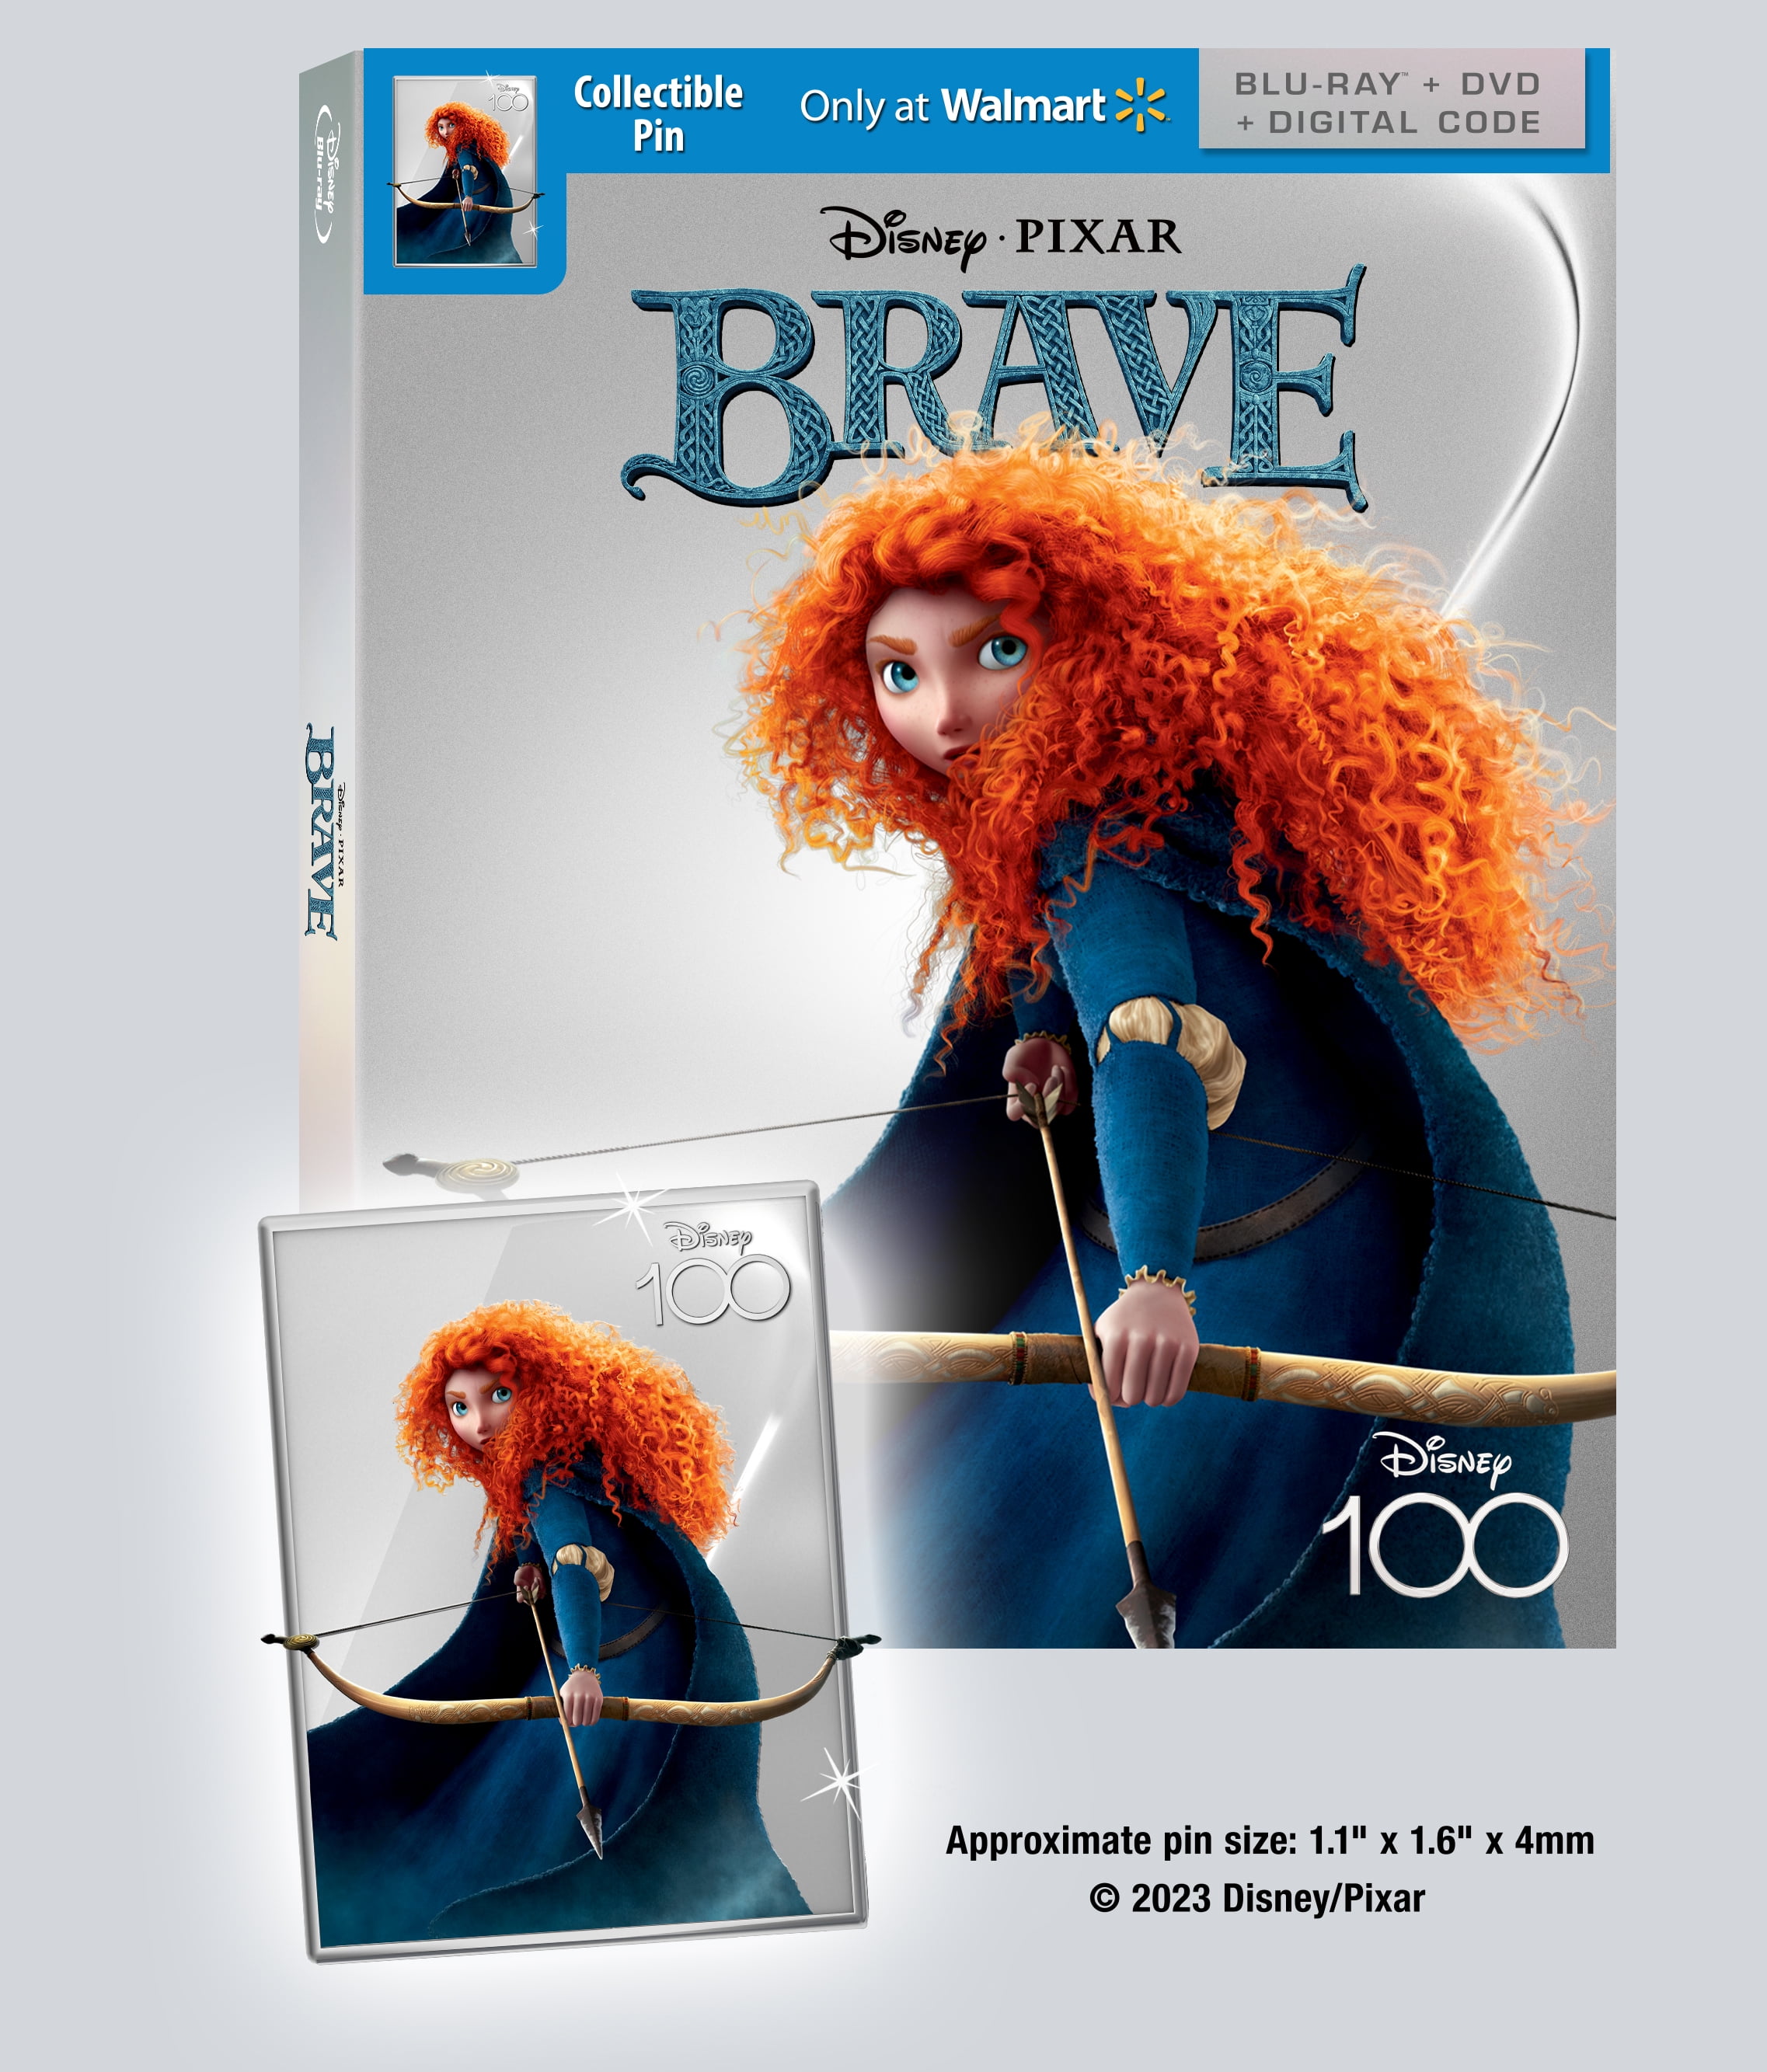 Disney 100-Movie Blu-ray Collection: How to Buy Online